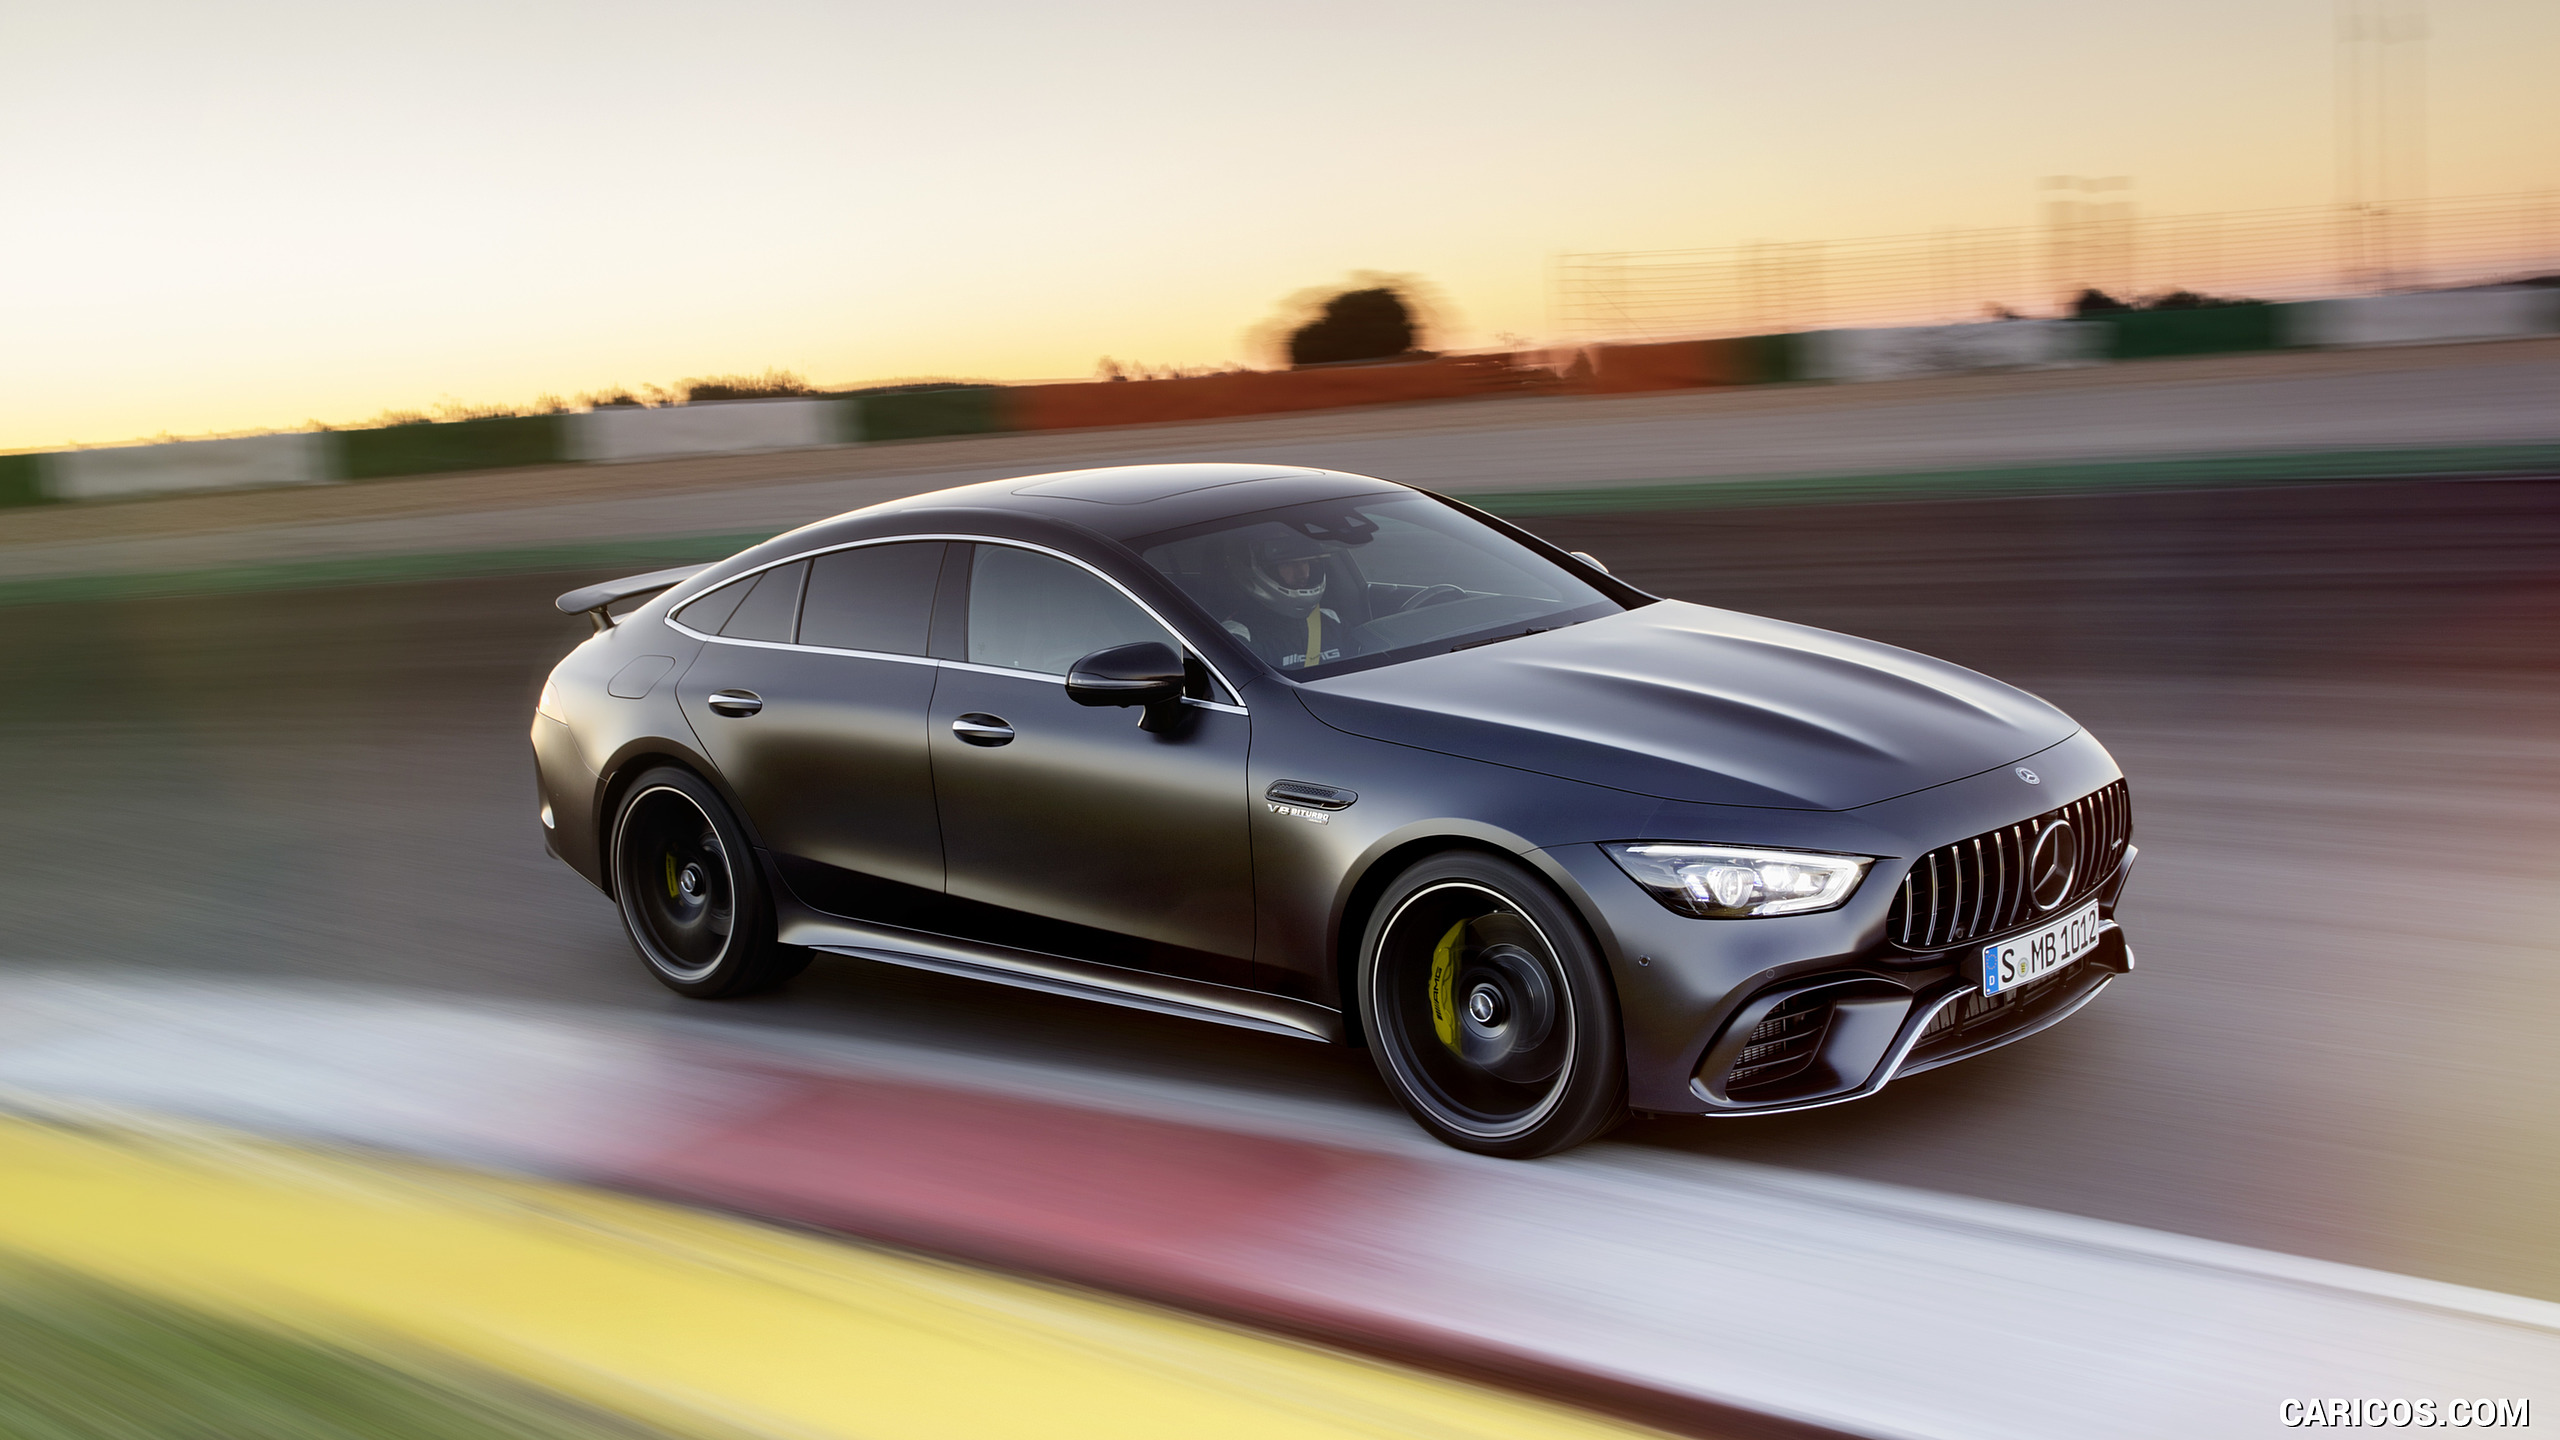 2019 Mercedes-AMG GT 63 S 4MATIC+ 4-Door Coupe (Color: Graphite Grey Magno) - Front Three-Quarter, #8 of 427